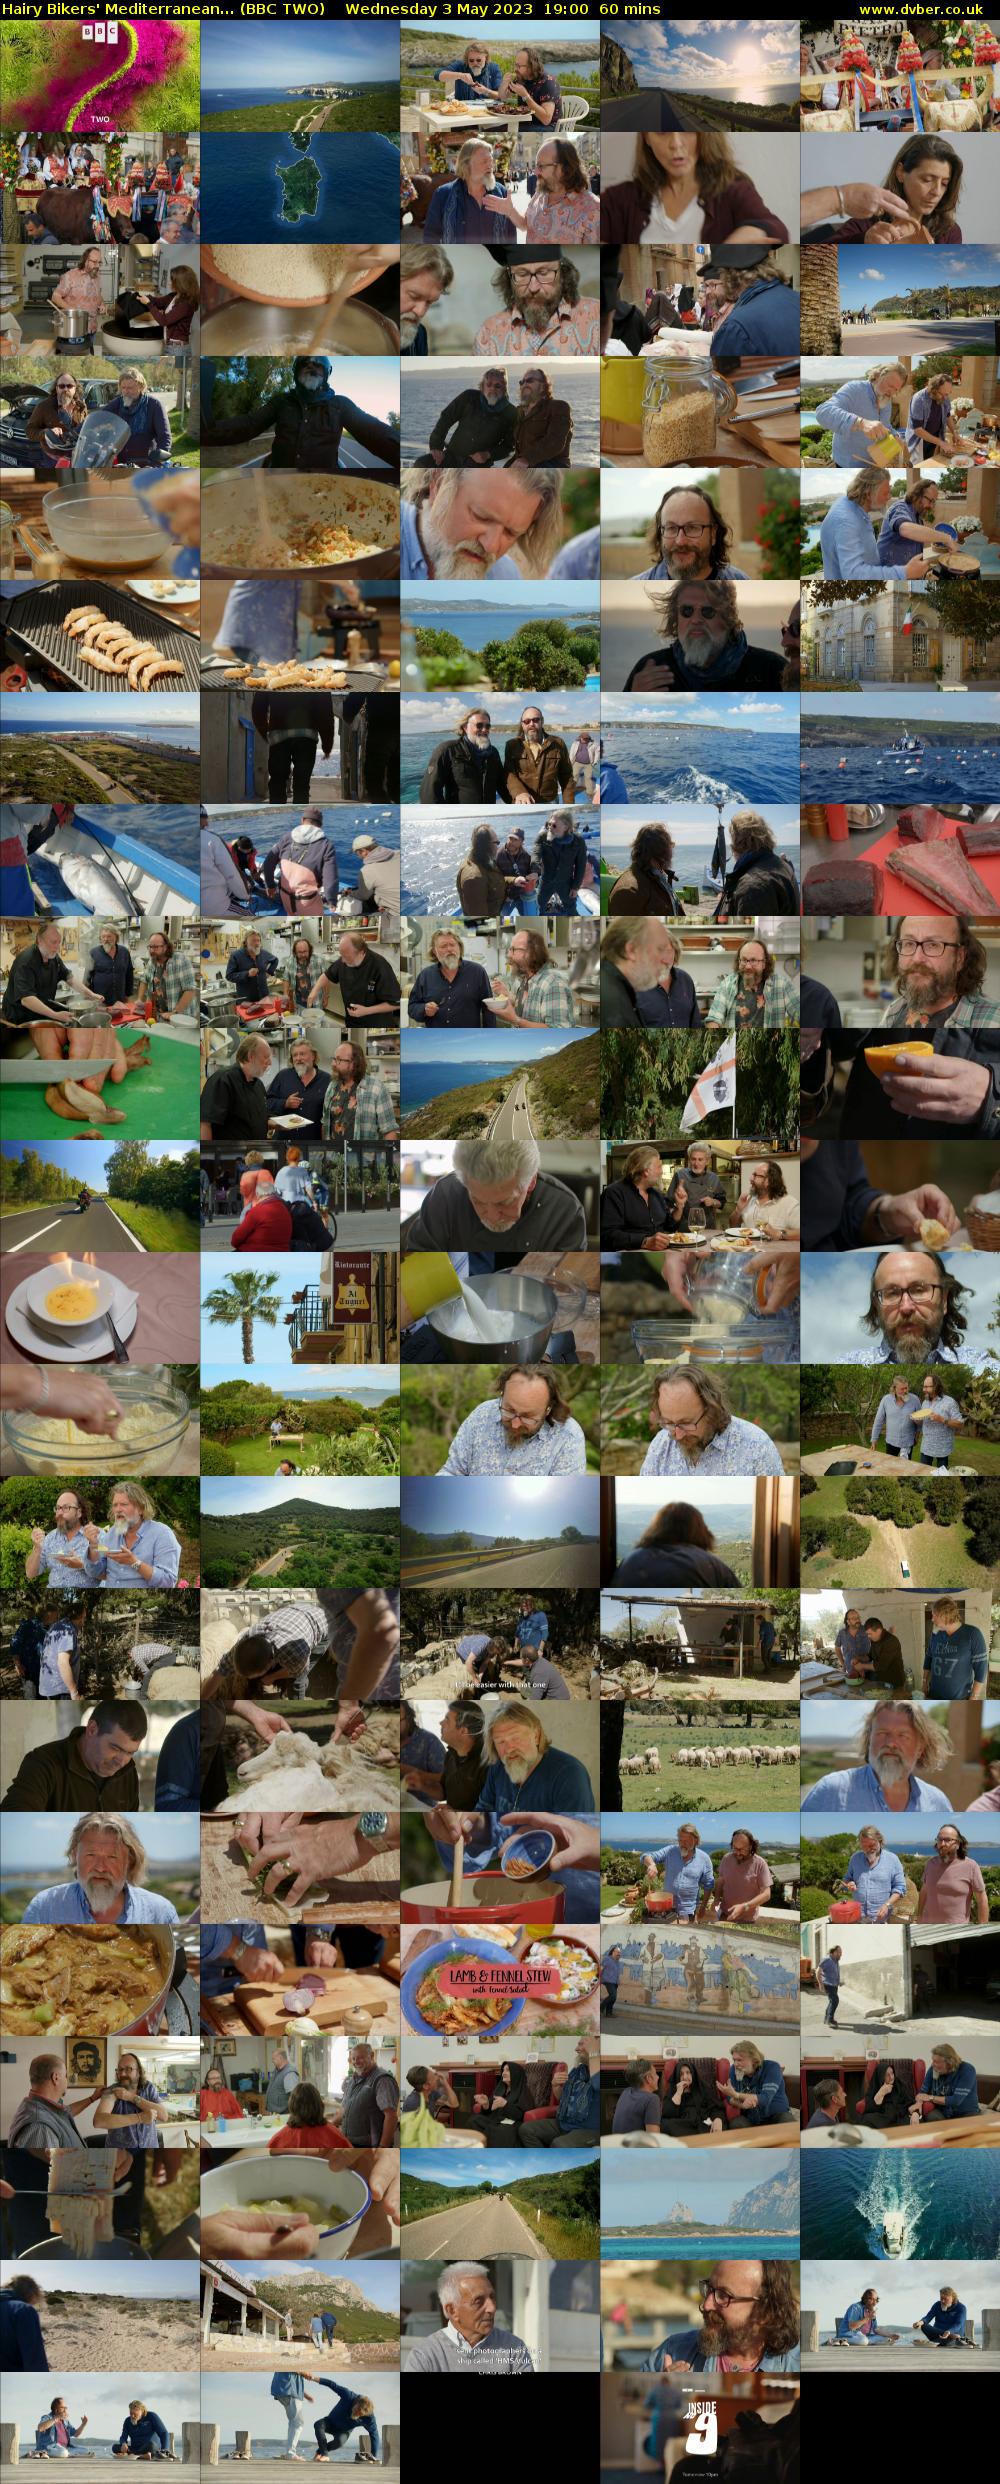 Hairy Bikers' Mediterranean... (BBC TWO) Wednesday 3 May 2023 19:00 - 20:00